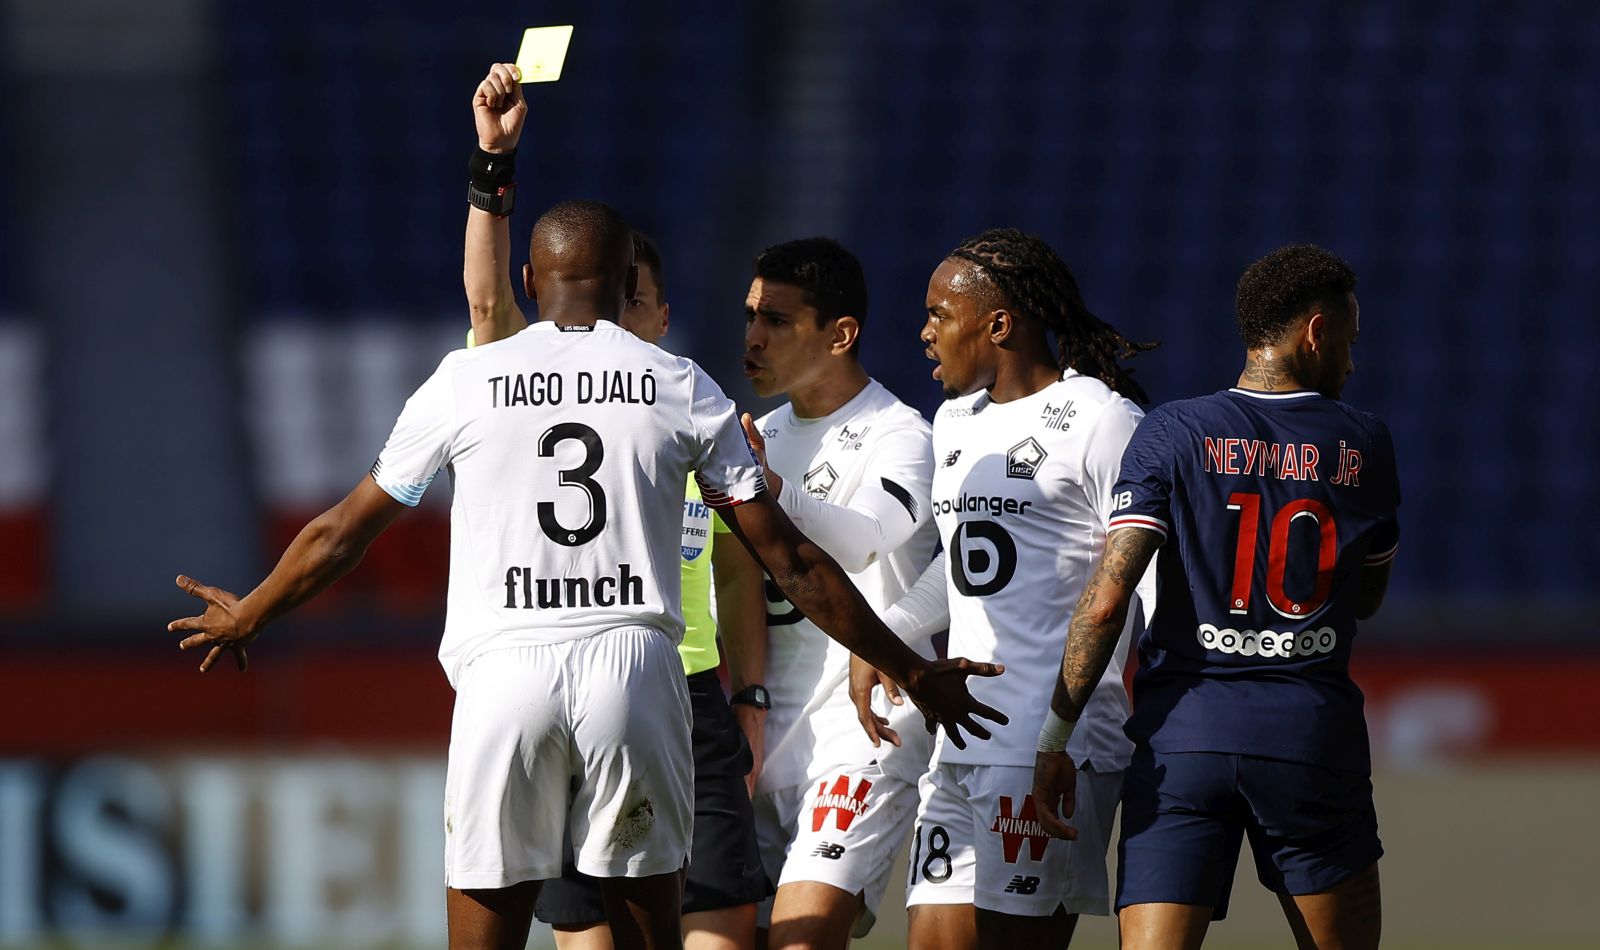 epa09113653 Tiago Djalo of Lille OSC is booked during the French Ligue 1 soccer match between Paris Saint German and Lille OSC, in Paris, France, 03 April 2021.  EPA/IAN LANGSDON